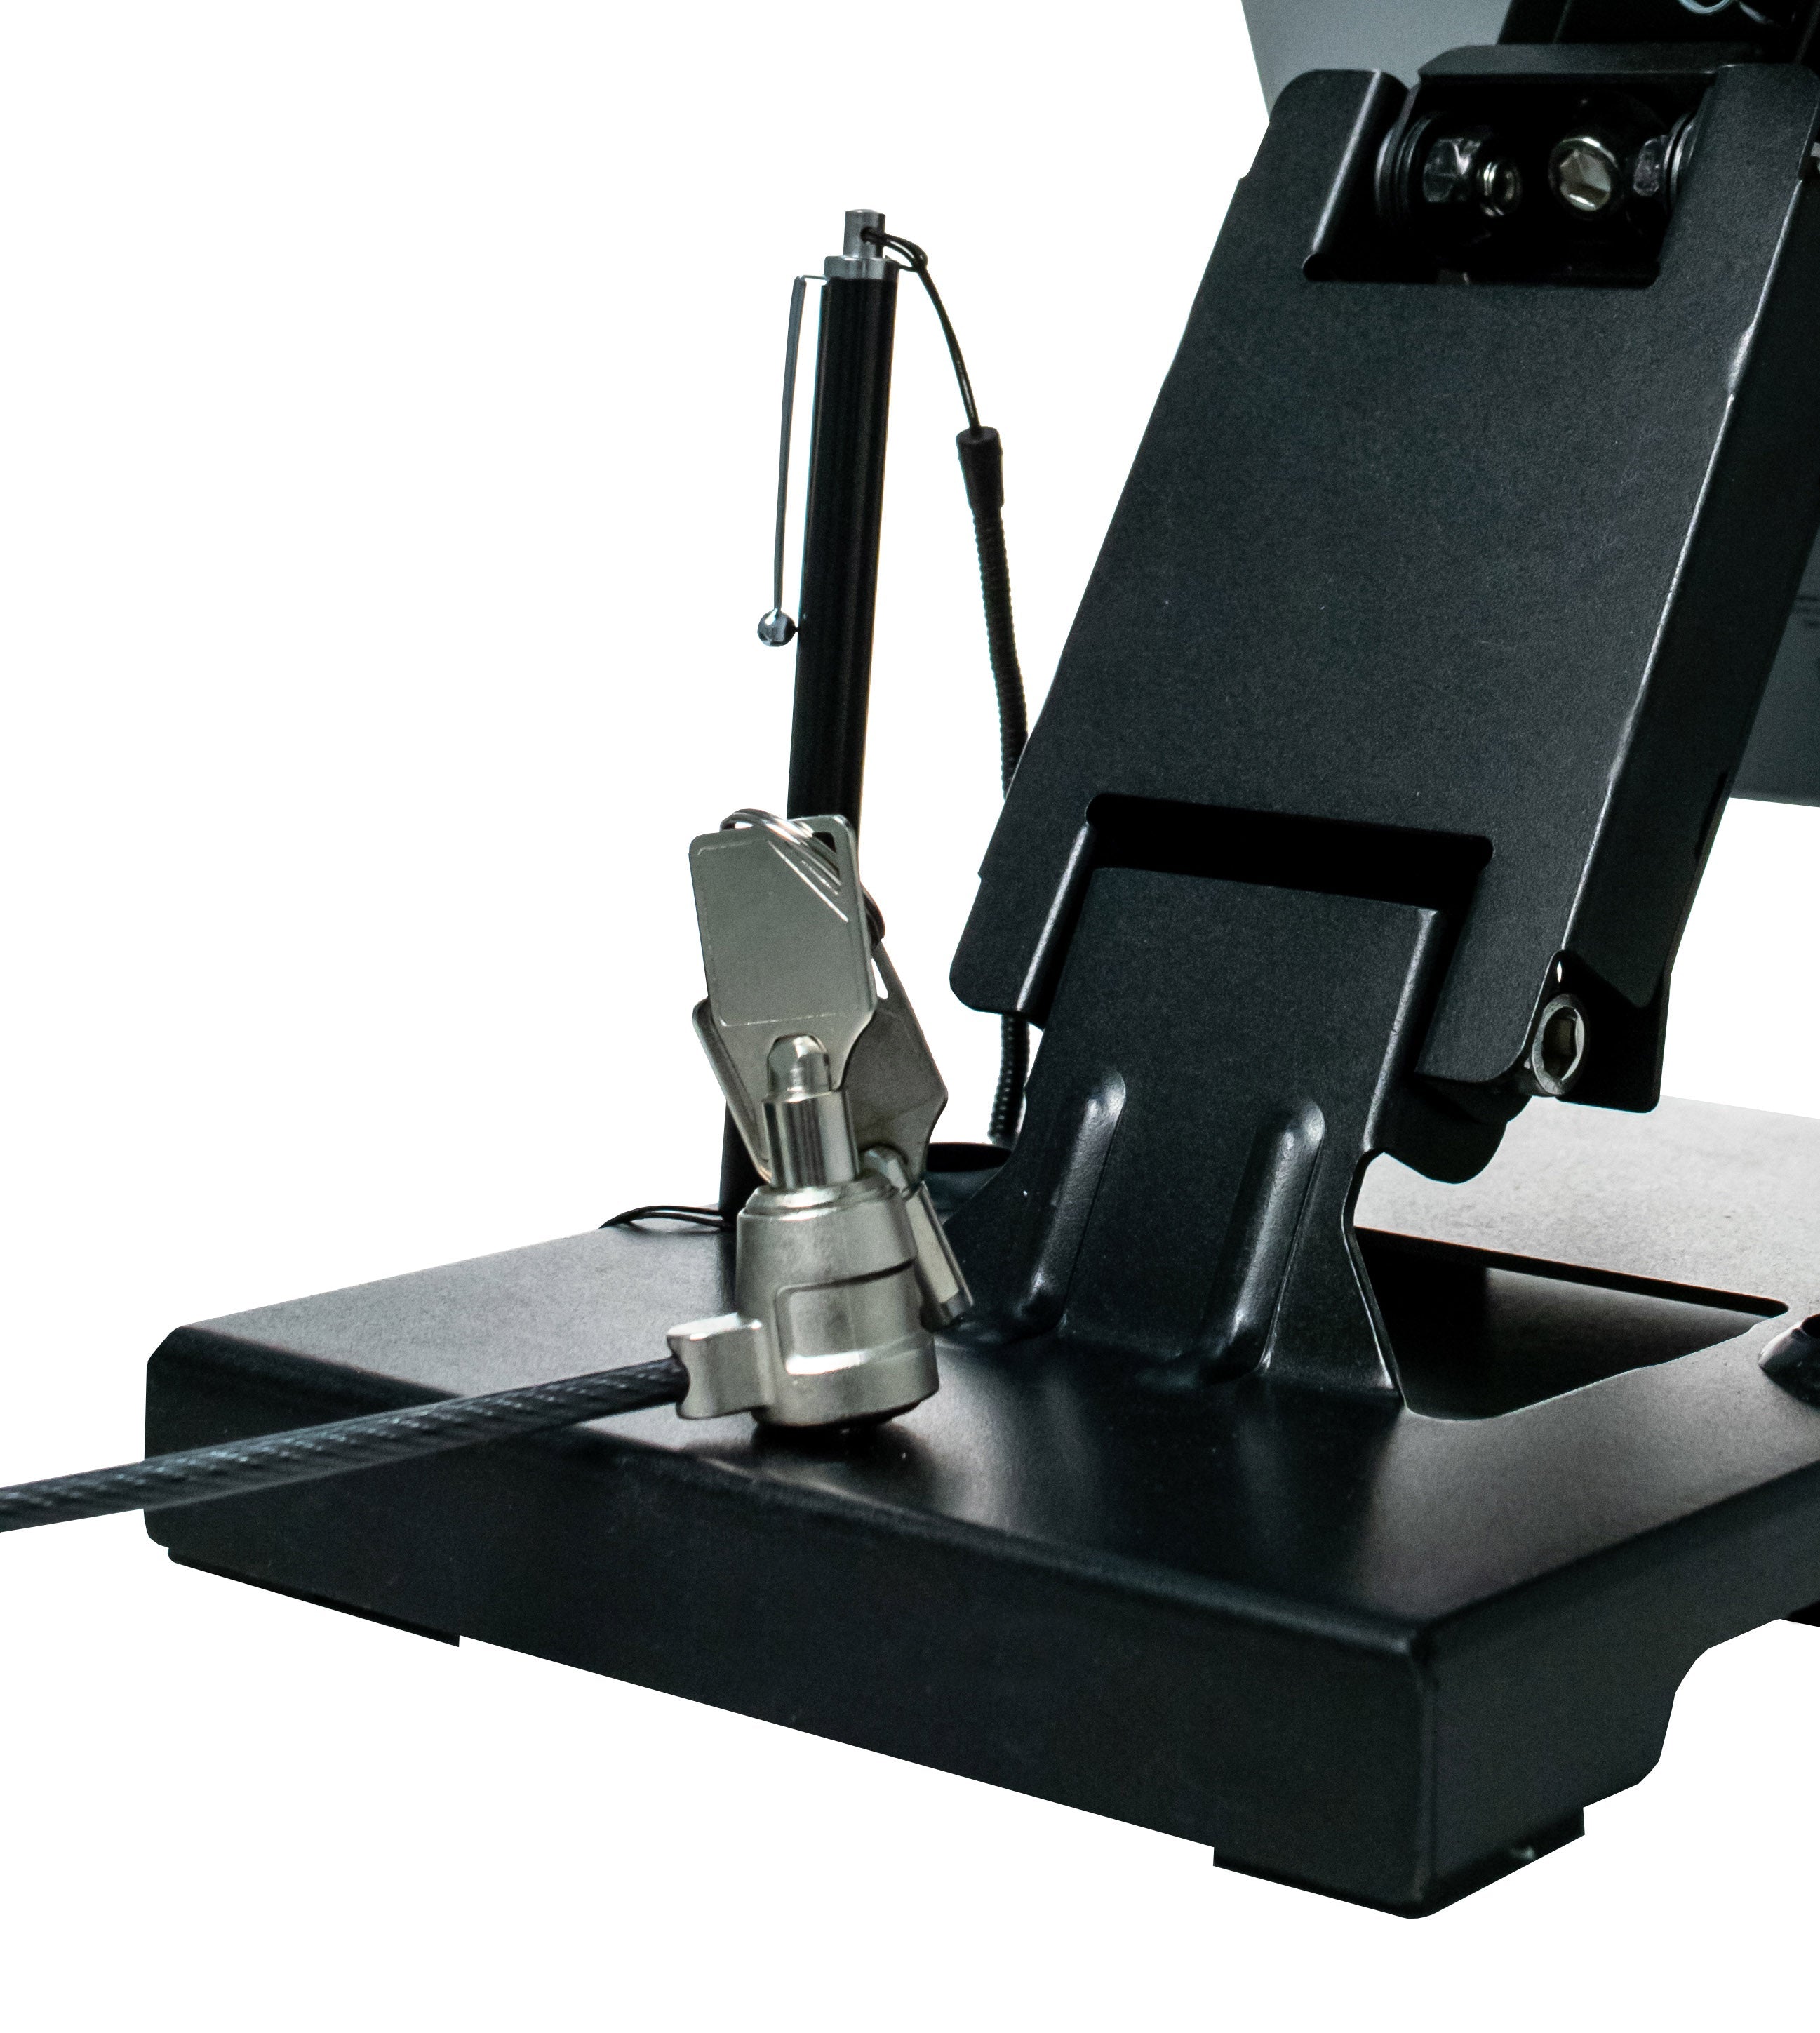 Flat-Folding Tabletop Security Stand for 7 - 14 Inch Tablets